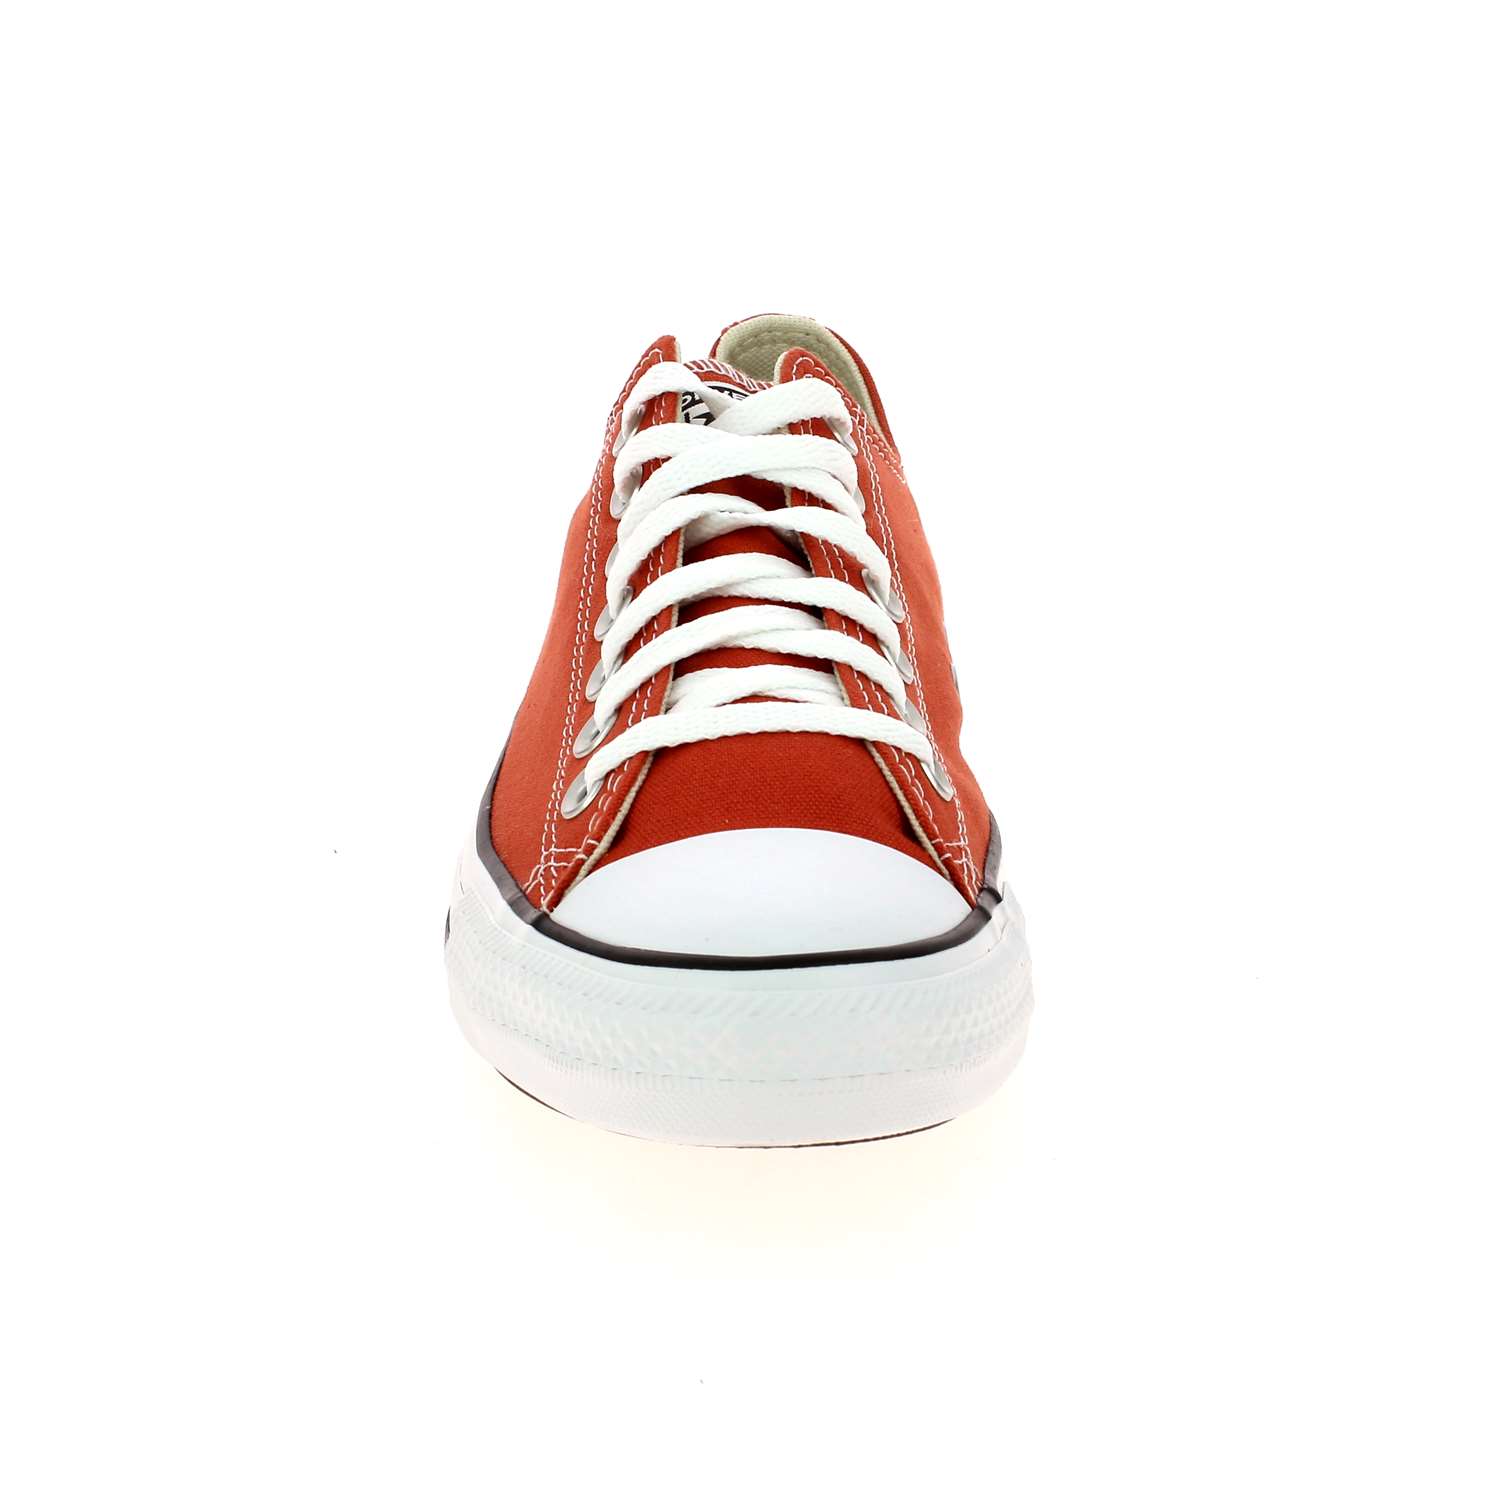 03 - ALL STAR OX RECYCLED - CONVERSE - Baskets - Textile